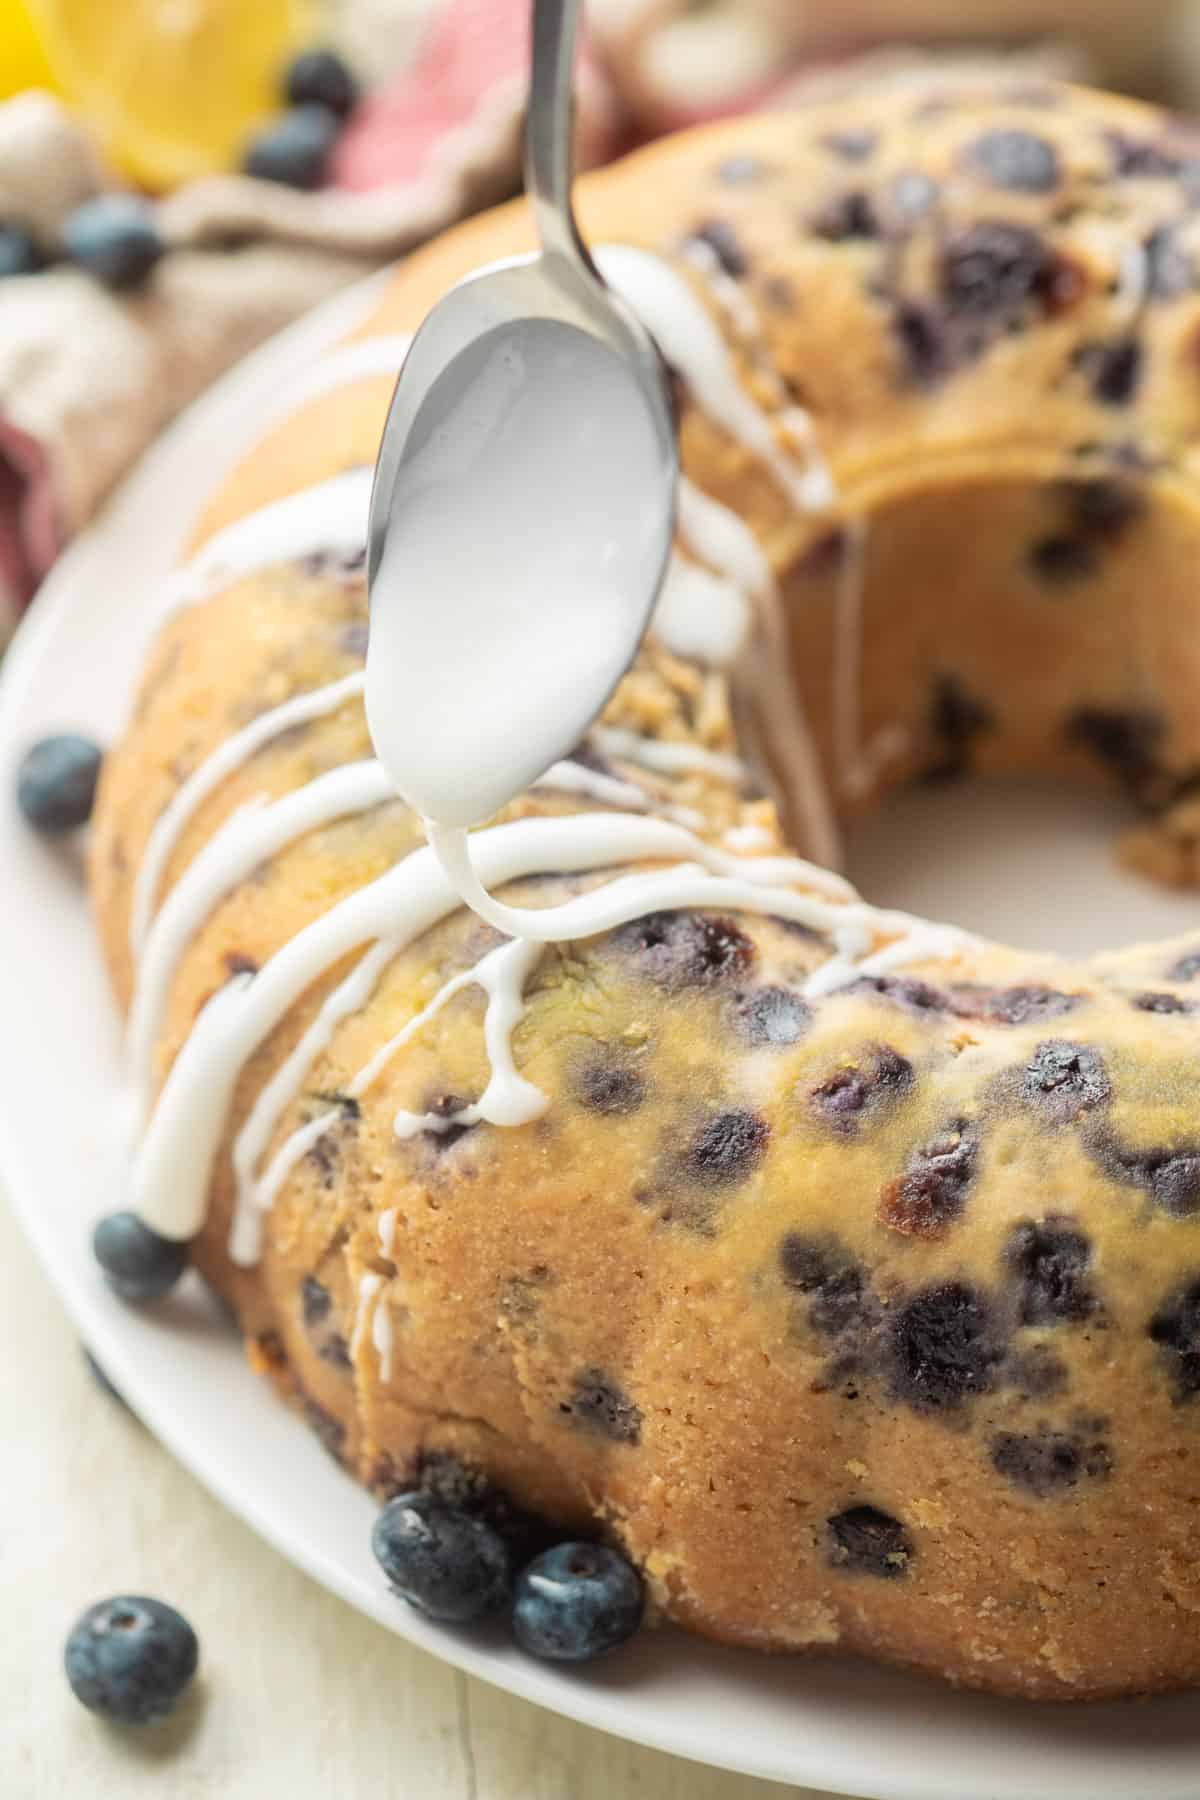 Spoon drizzling glaze over a Vegan Blueberry Cake.